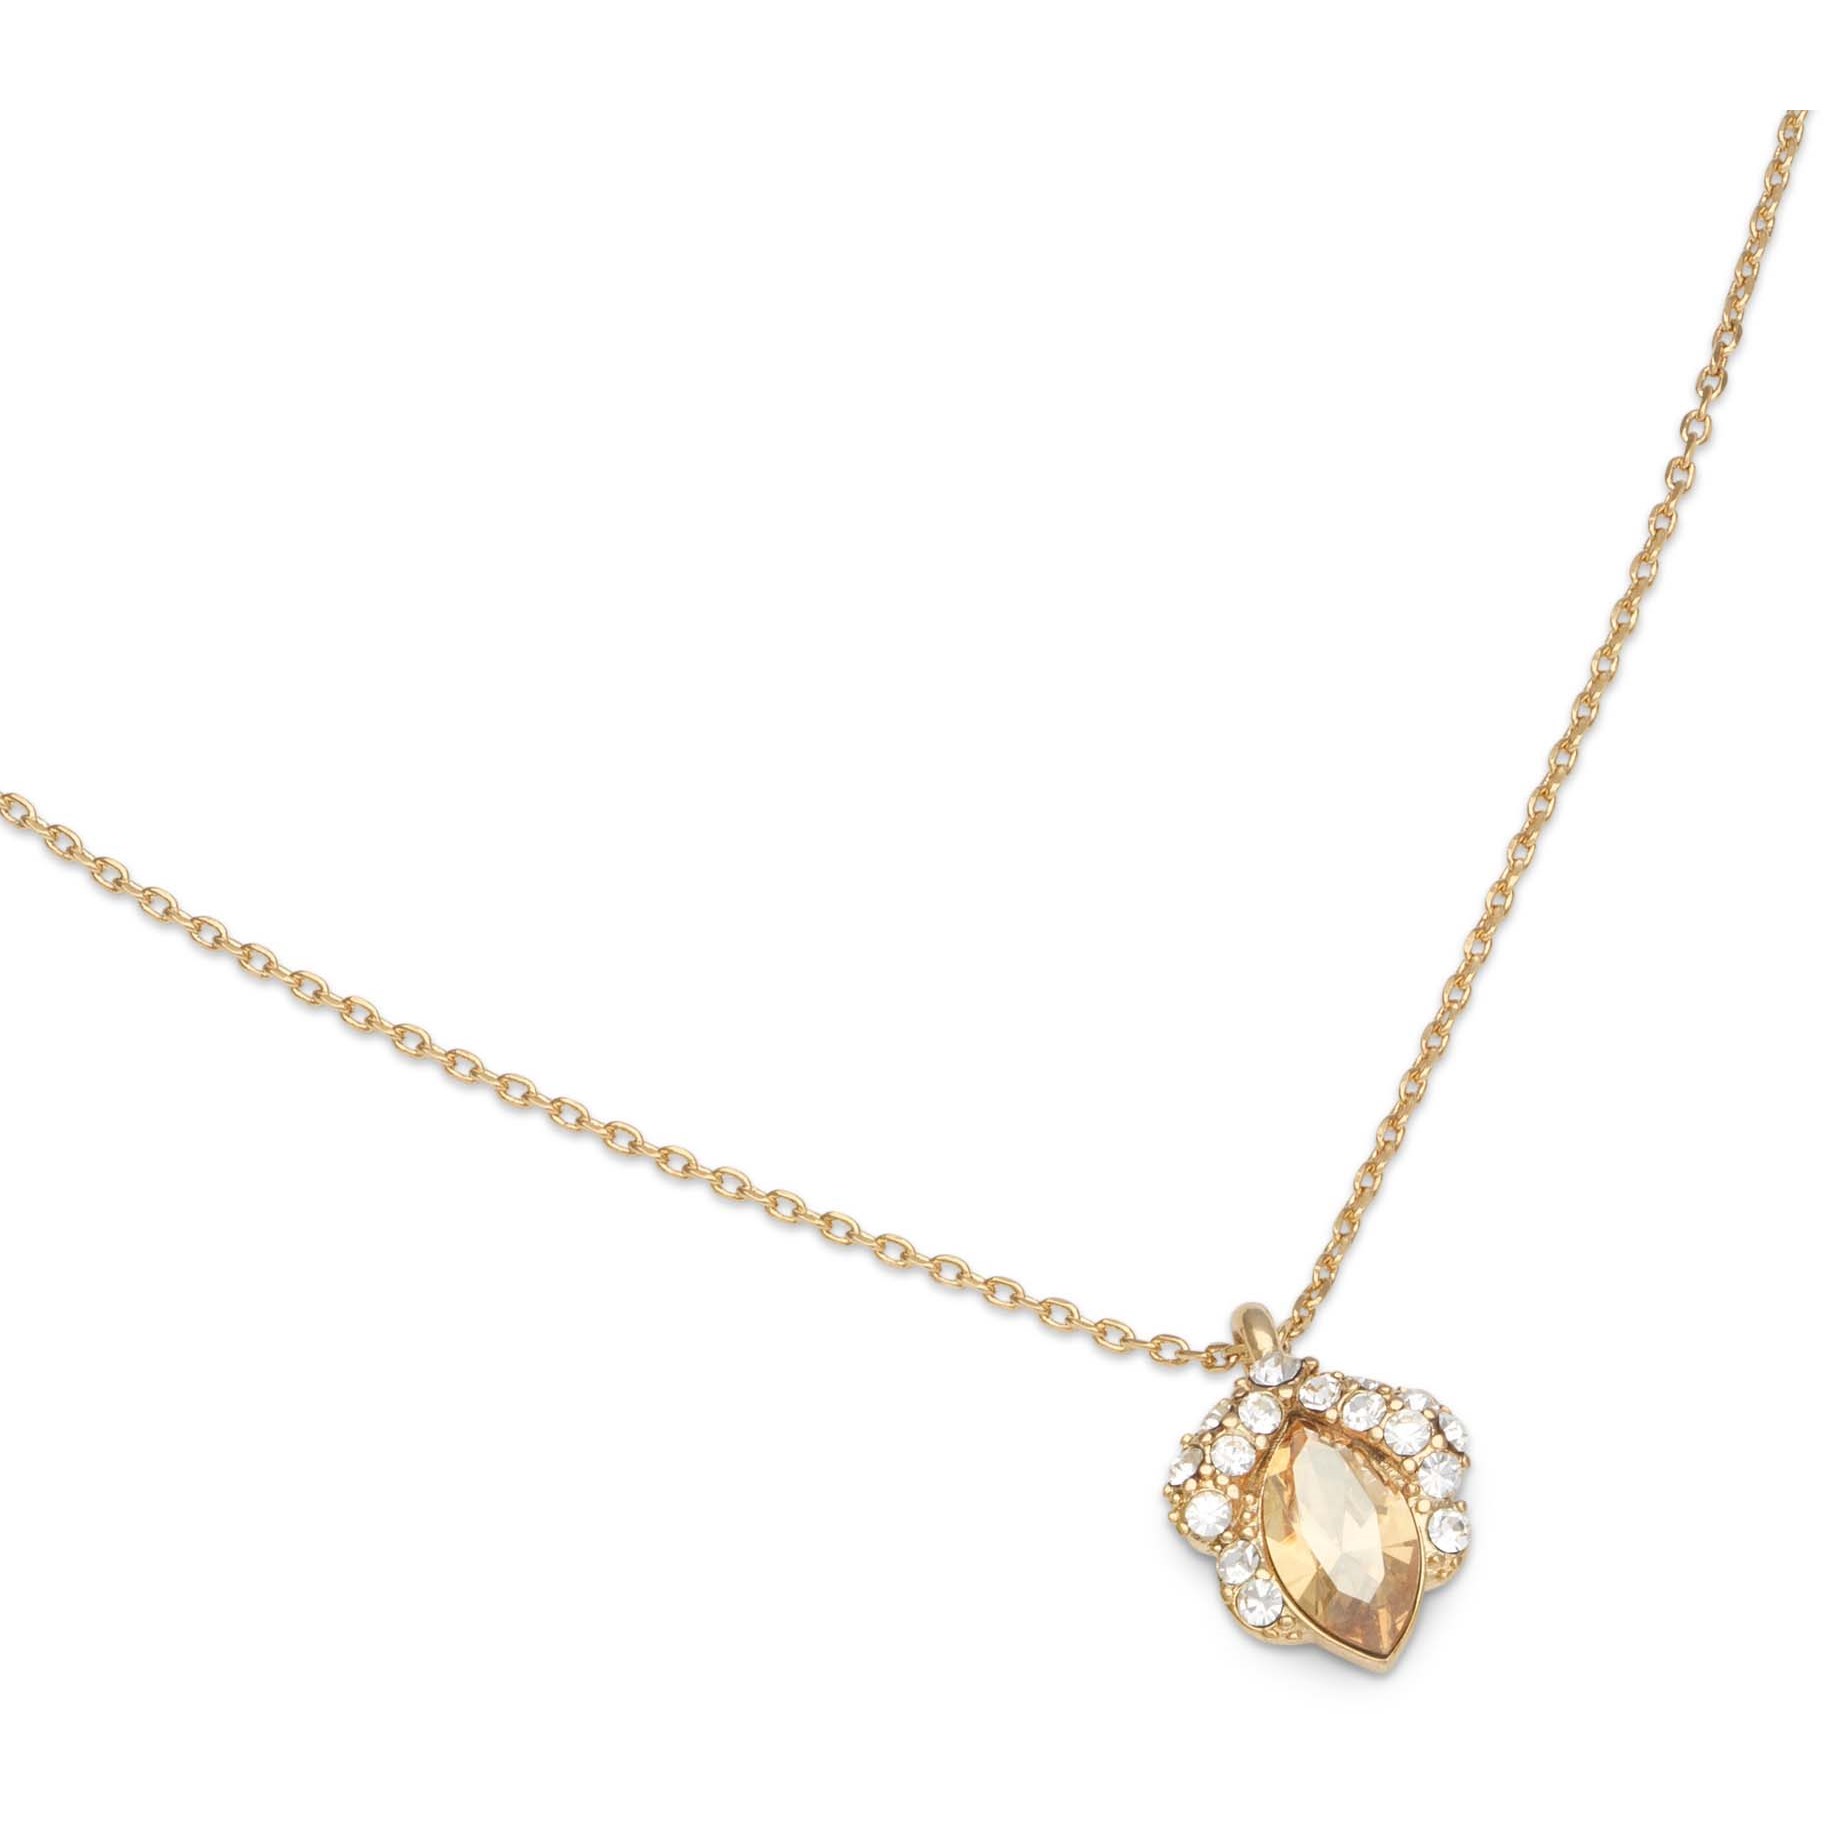 Läs mer om Lily and Rose Petite Camille necklace Golden shadow